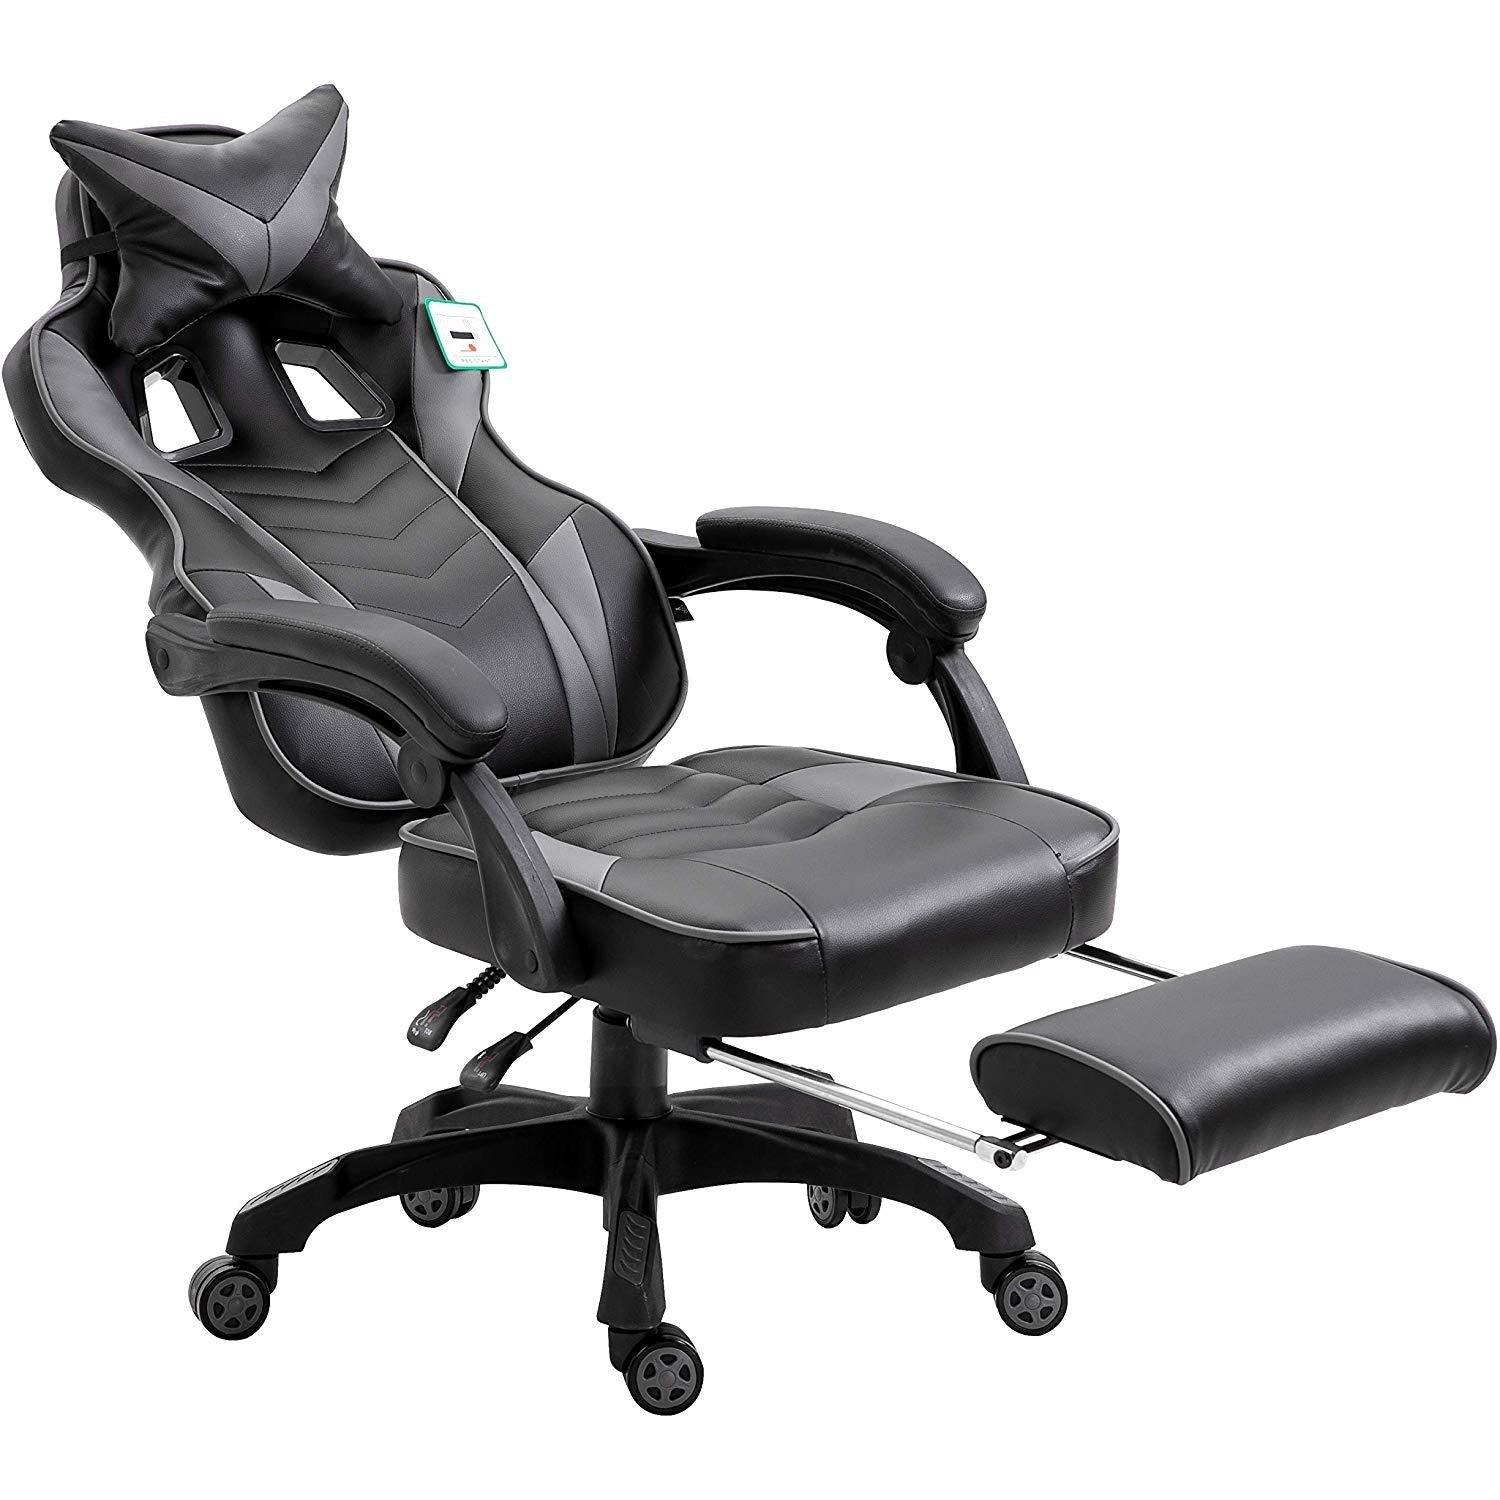 Cherry Tree Furniture High Back Recliner Gaming Chair with Cushion & Retractable Footrest Black & Grey